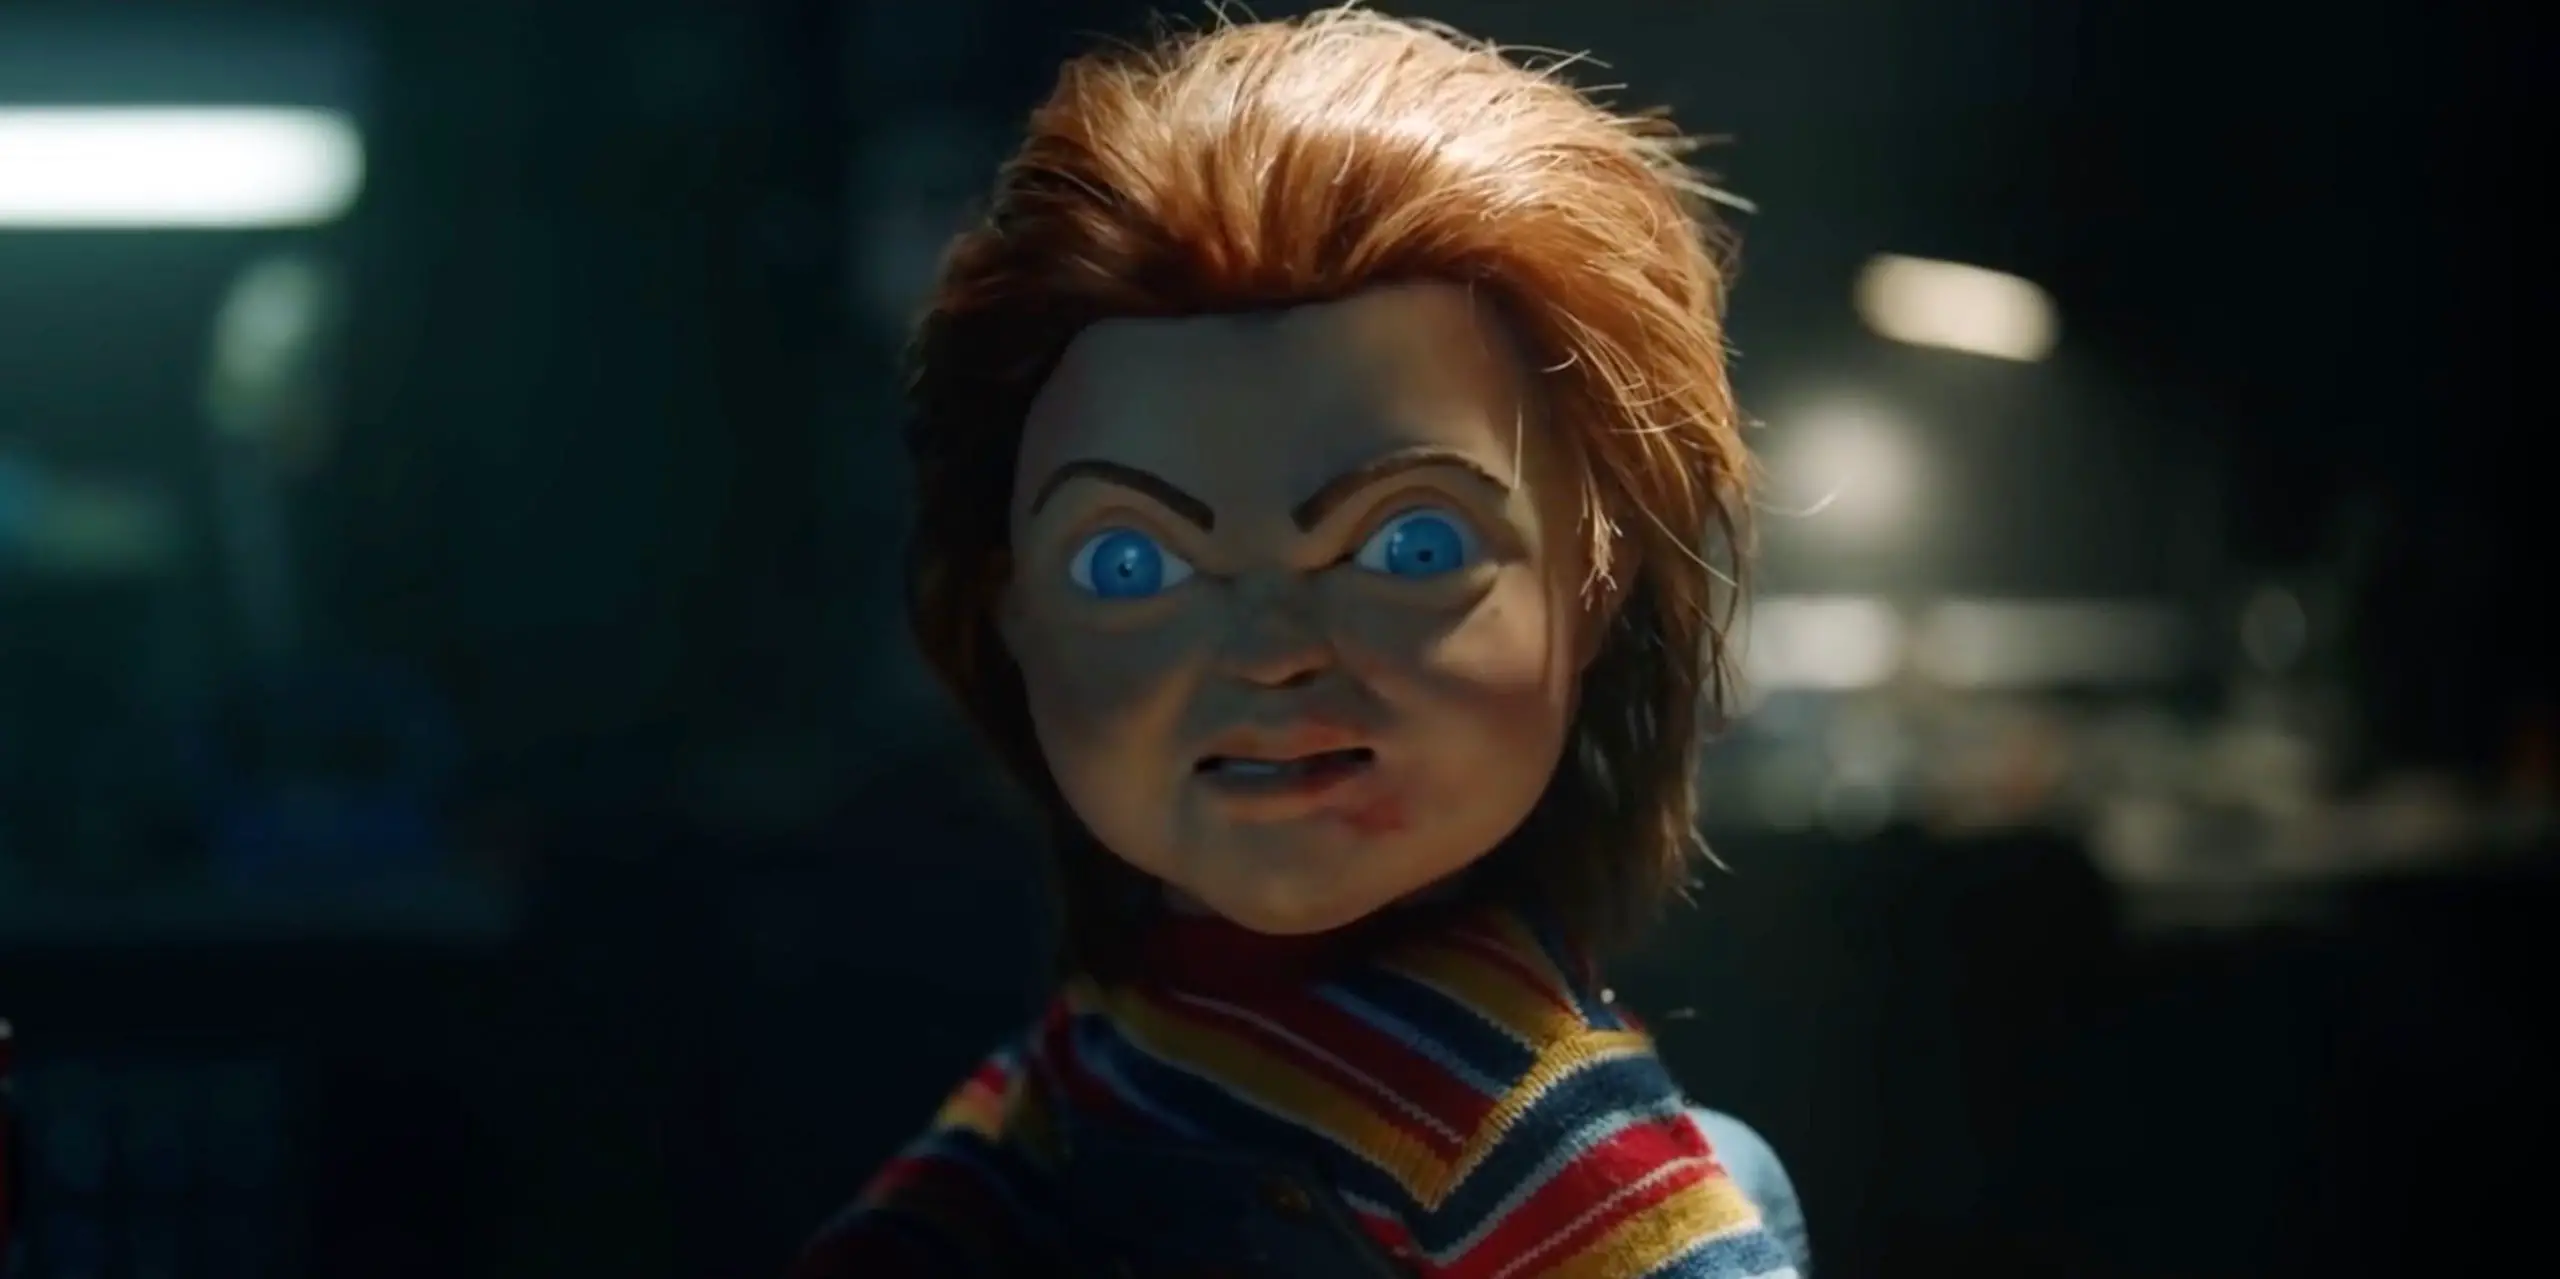 Child's Play 2019 horror film cover